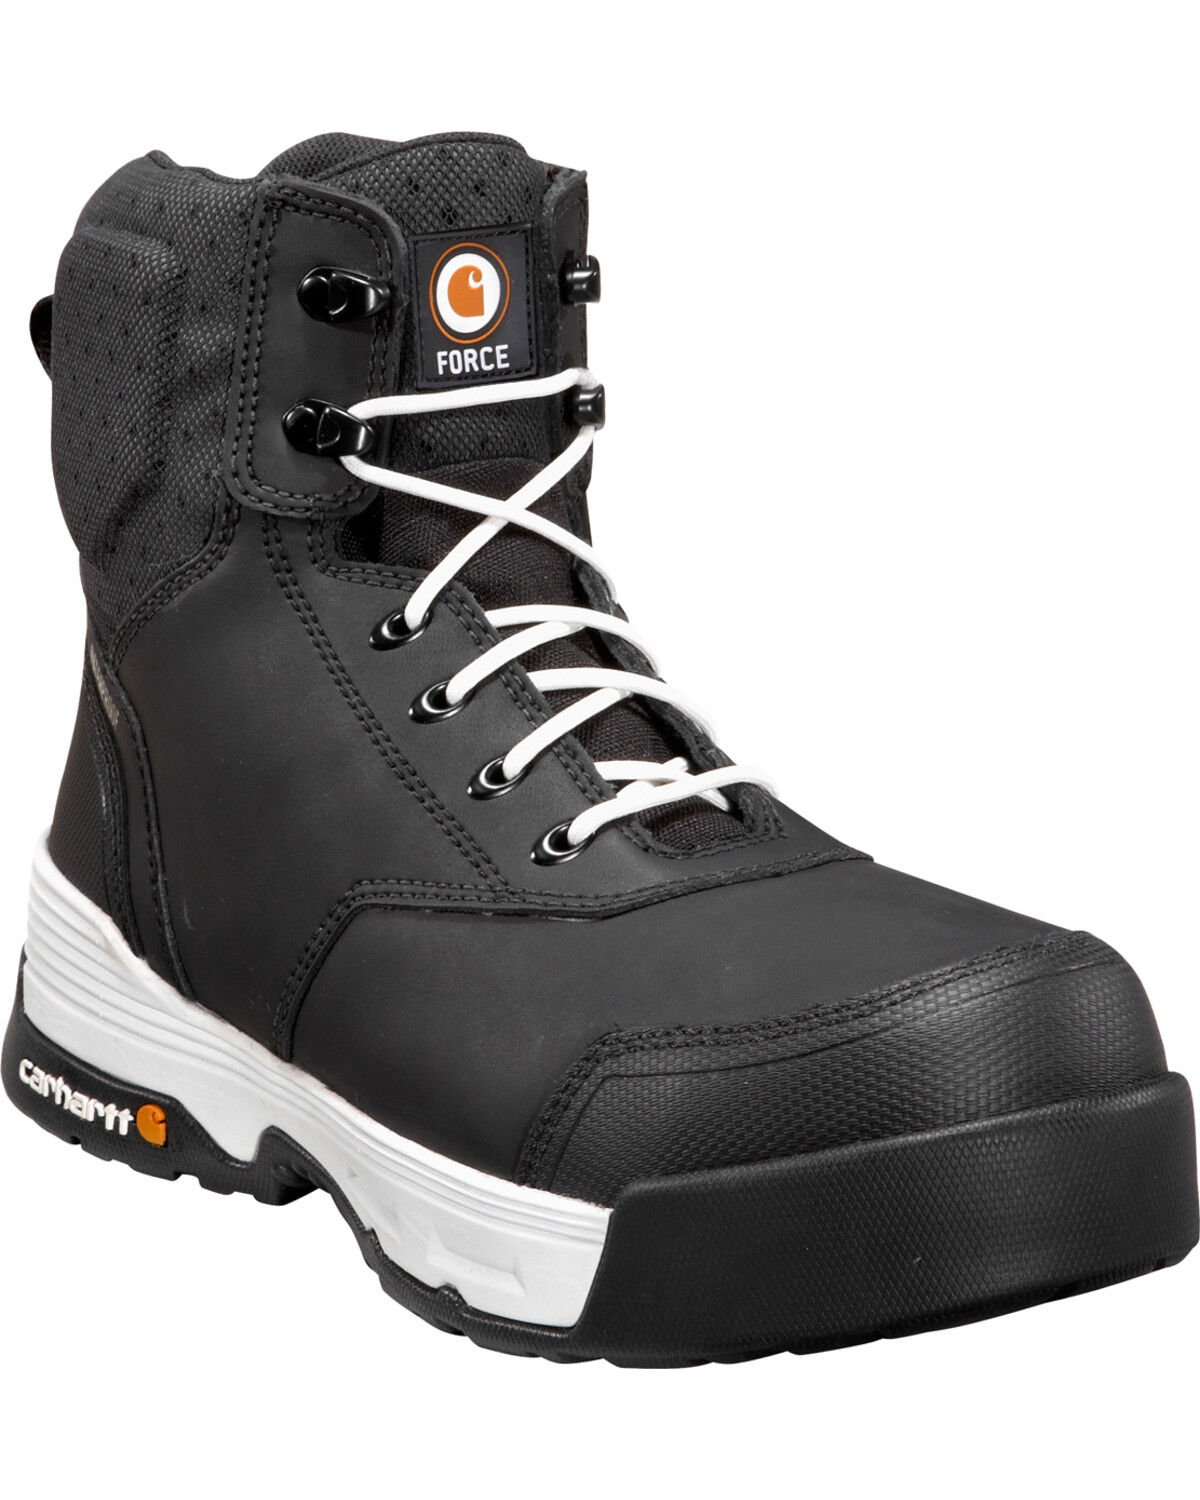 H2O Black Work Boots - Composite Toe 